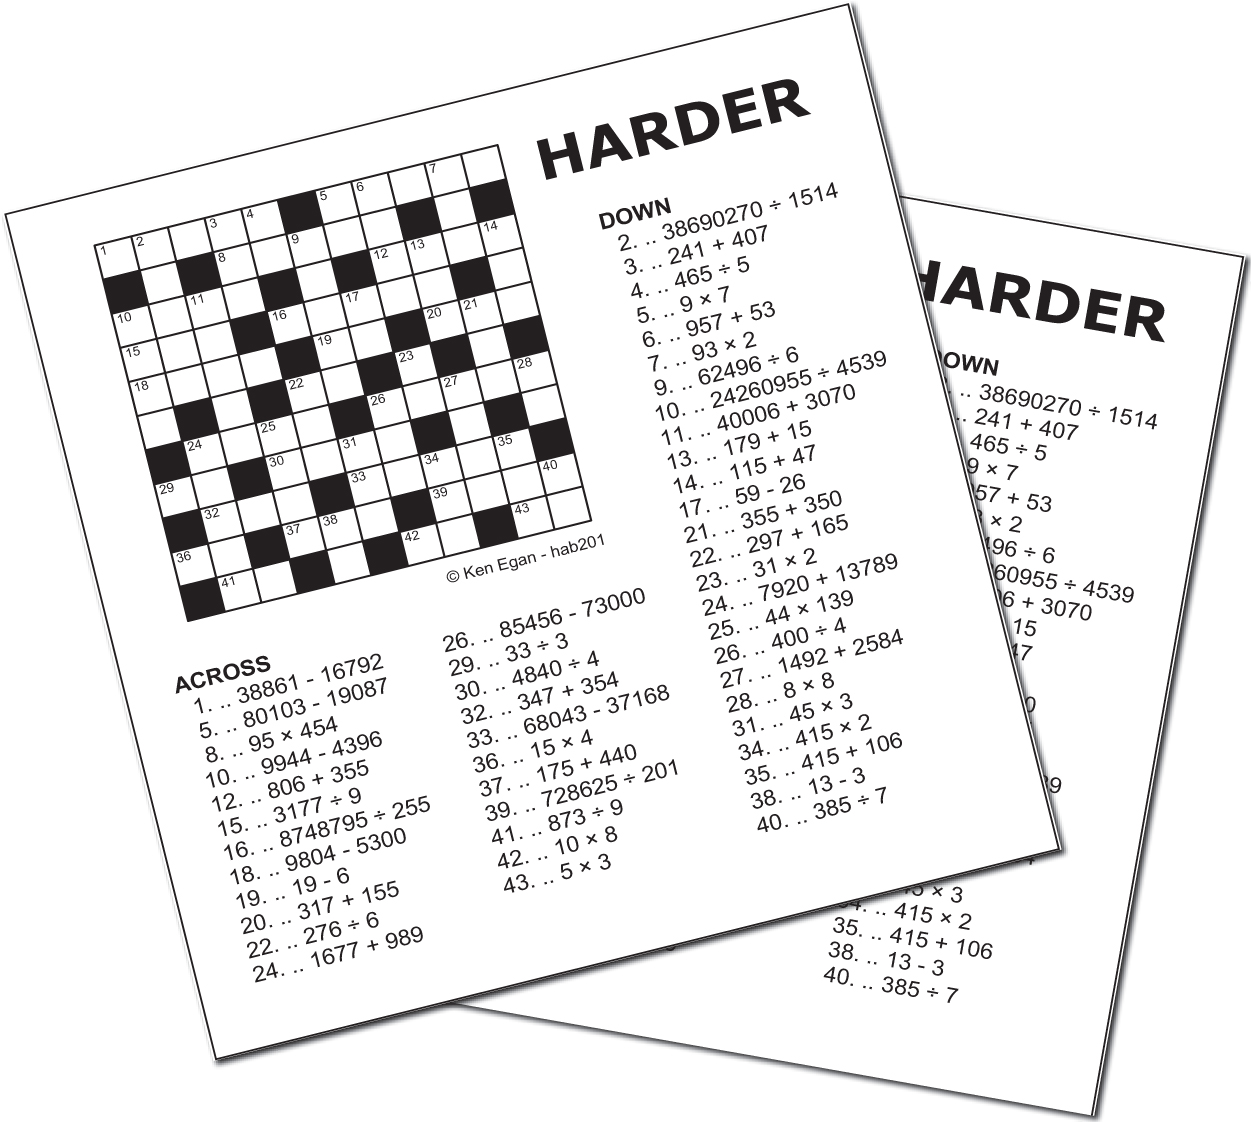 Image 1 for 20 HARDER PUZZLE BOOKLET 02